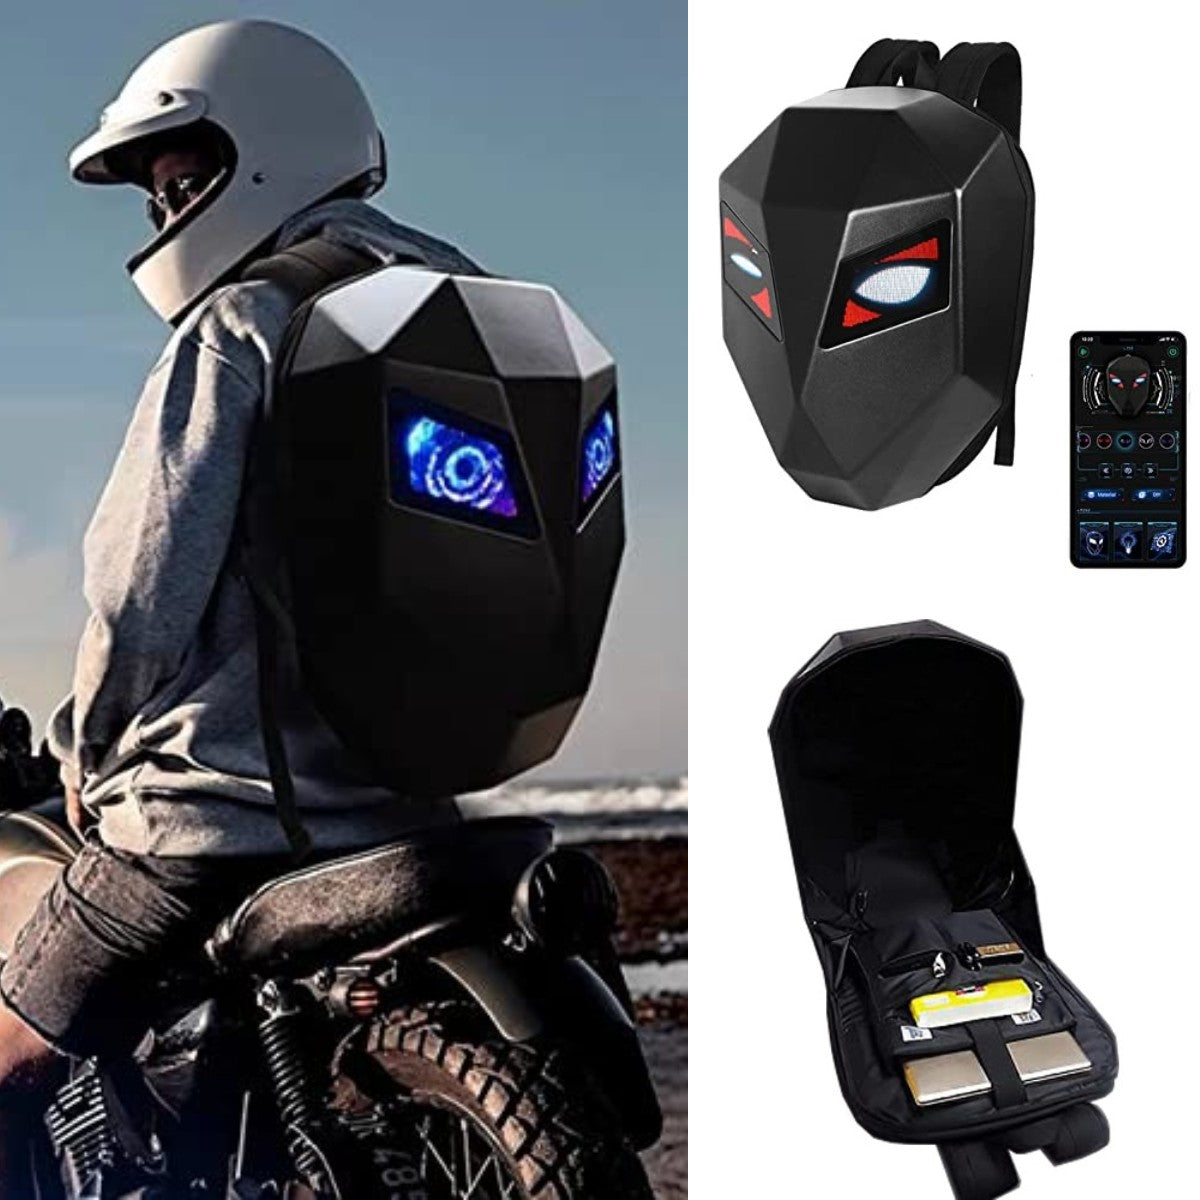 LED Knight Backpack Laptop Bag Hard Shell Motorcycle Riding Backpack ...